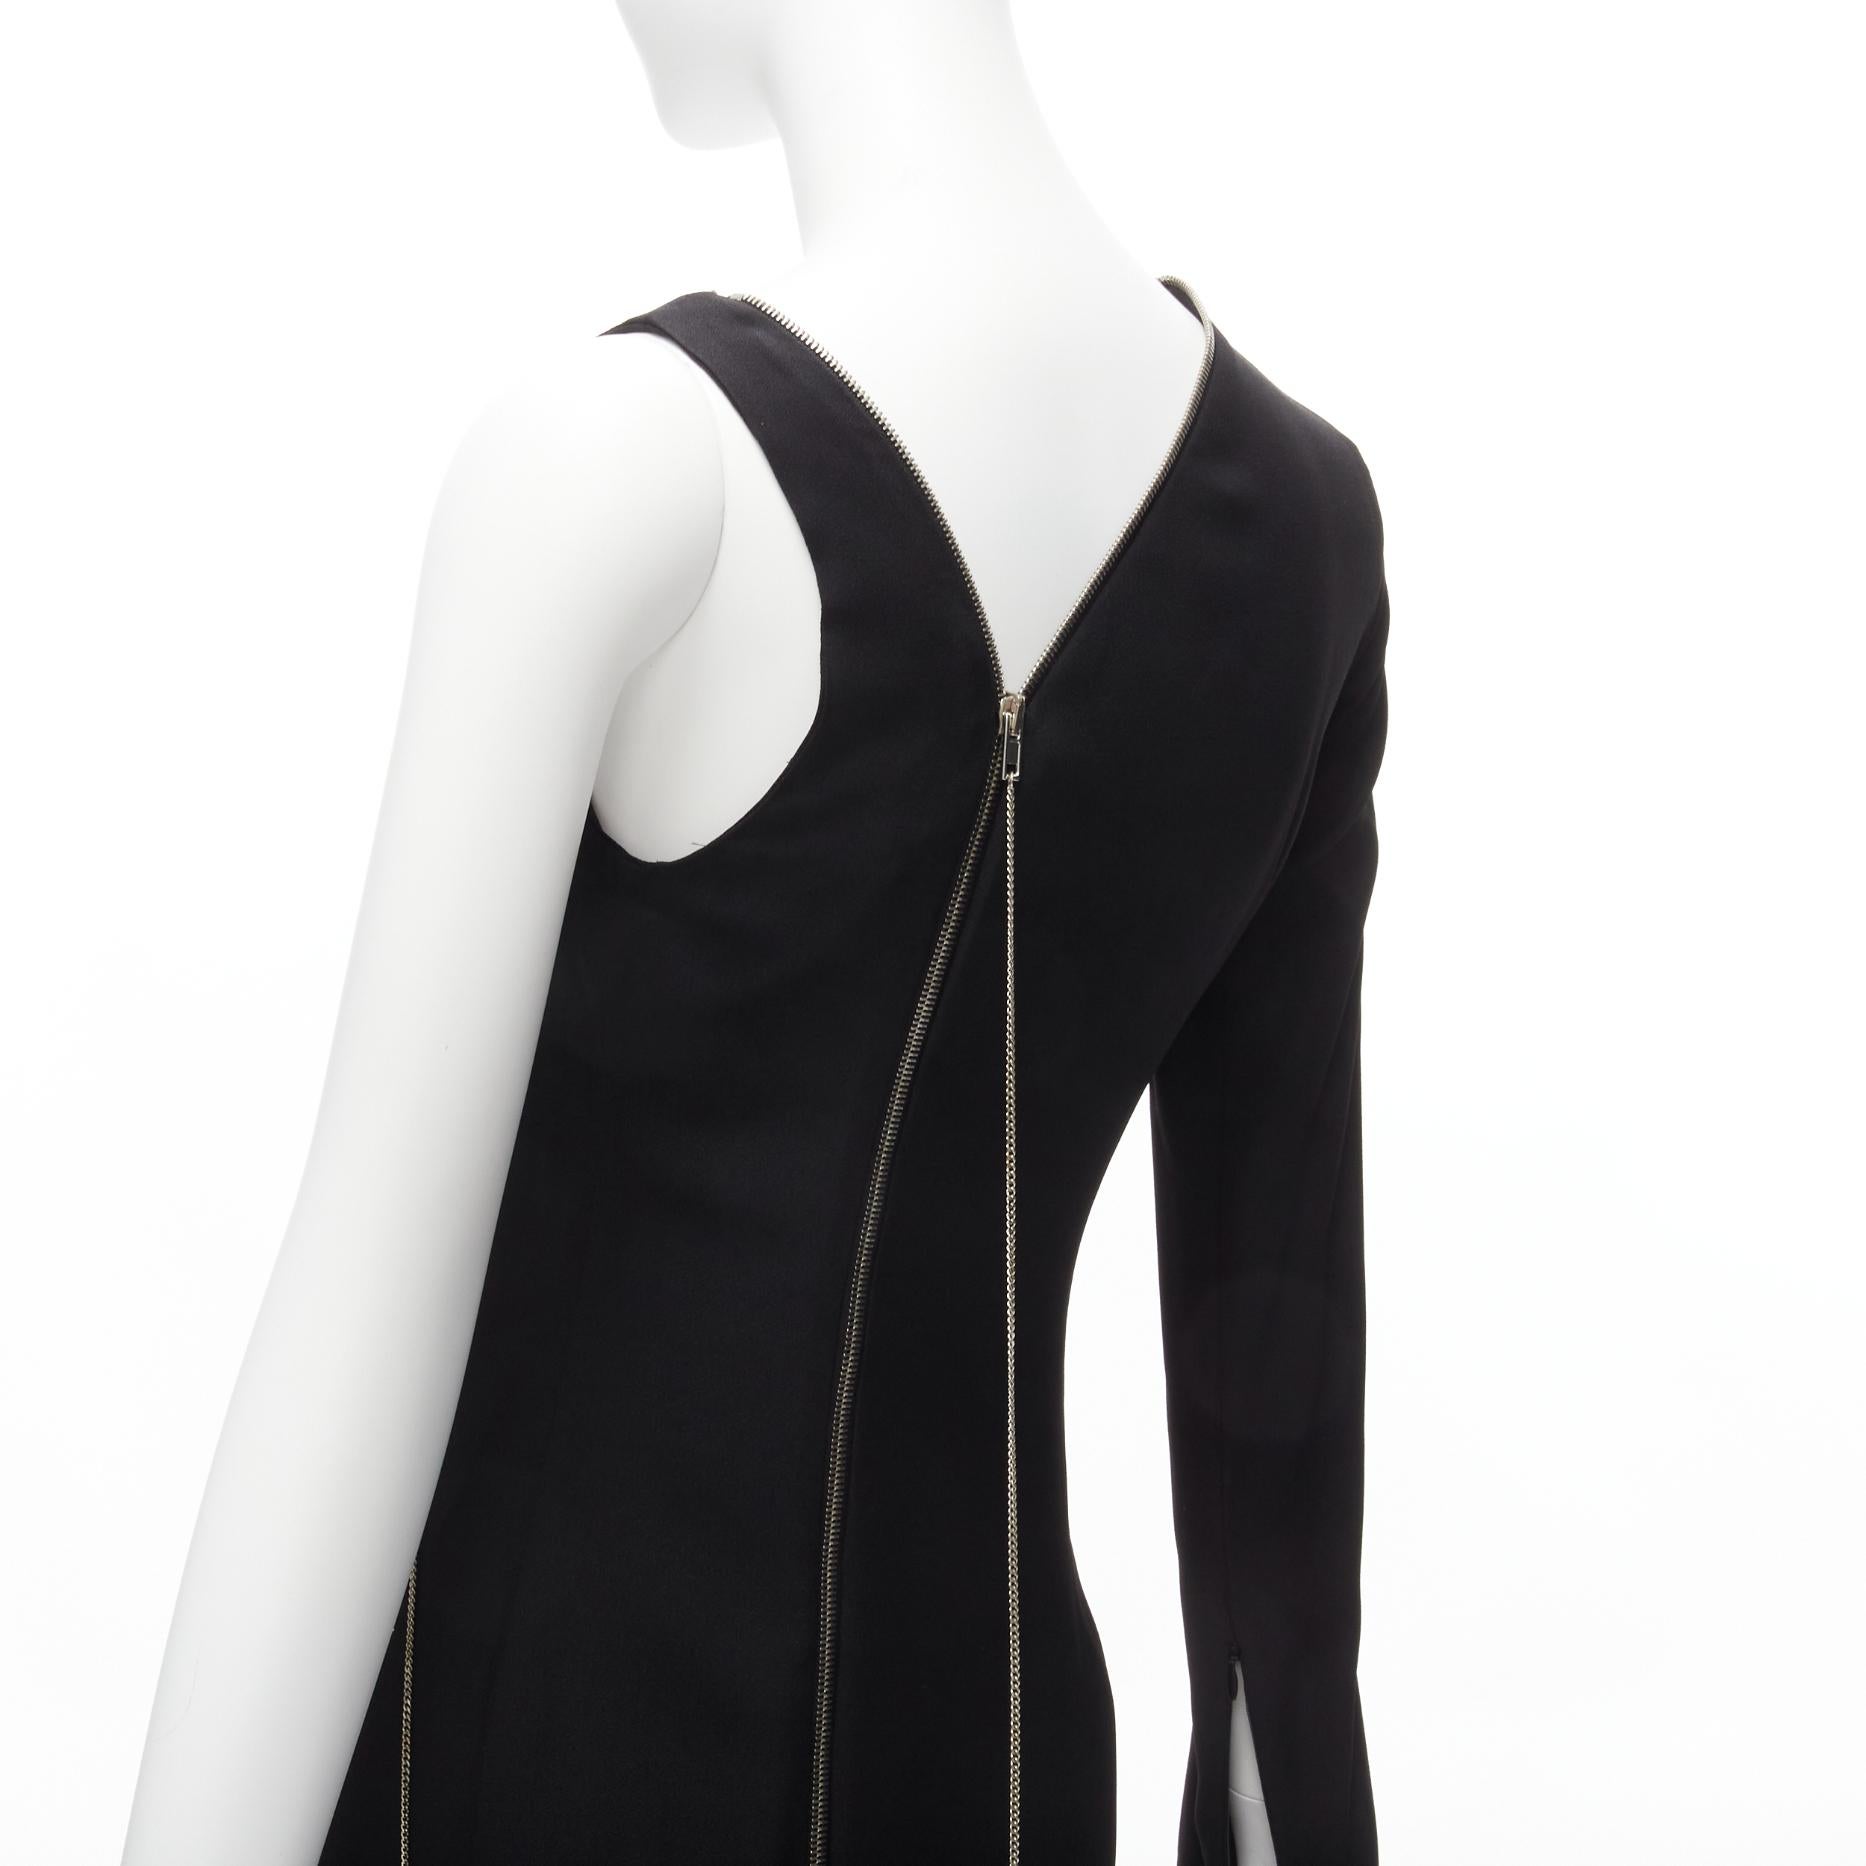 JEAN PAUL GAULTIER Vintage black adjustable zipper asymmetric evening dress IT38 XS
Reference: TGAS/D00345
Brand: Jean Paul Gaultier
Designer: Jean Paul Gaultier
Material: Acetate, Rayon
Color: Black, Silver
Pattern: Solid
Closure: Zip
Extra